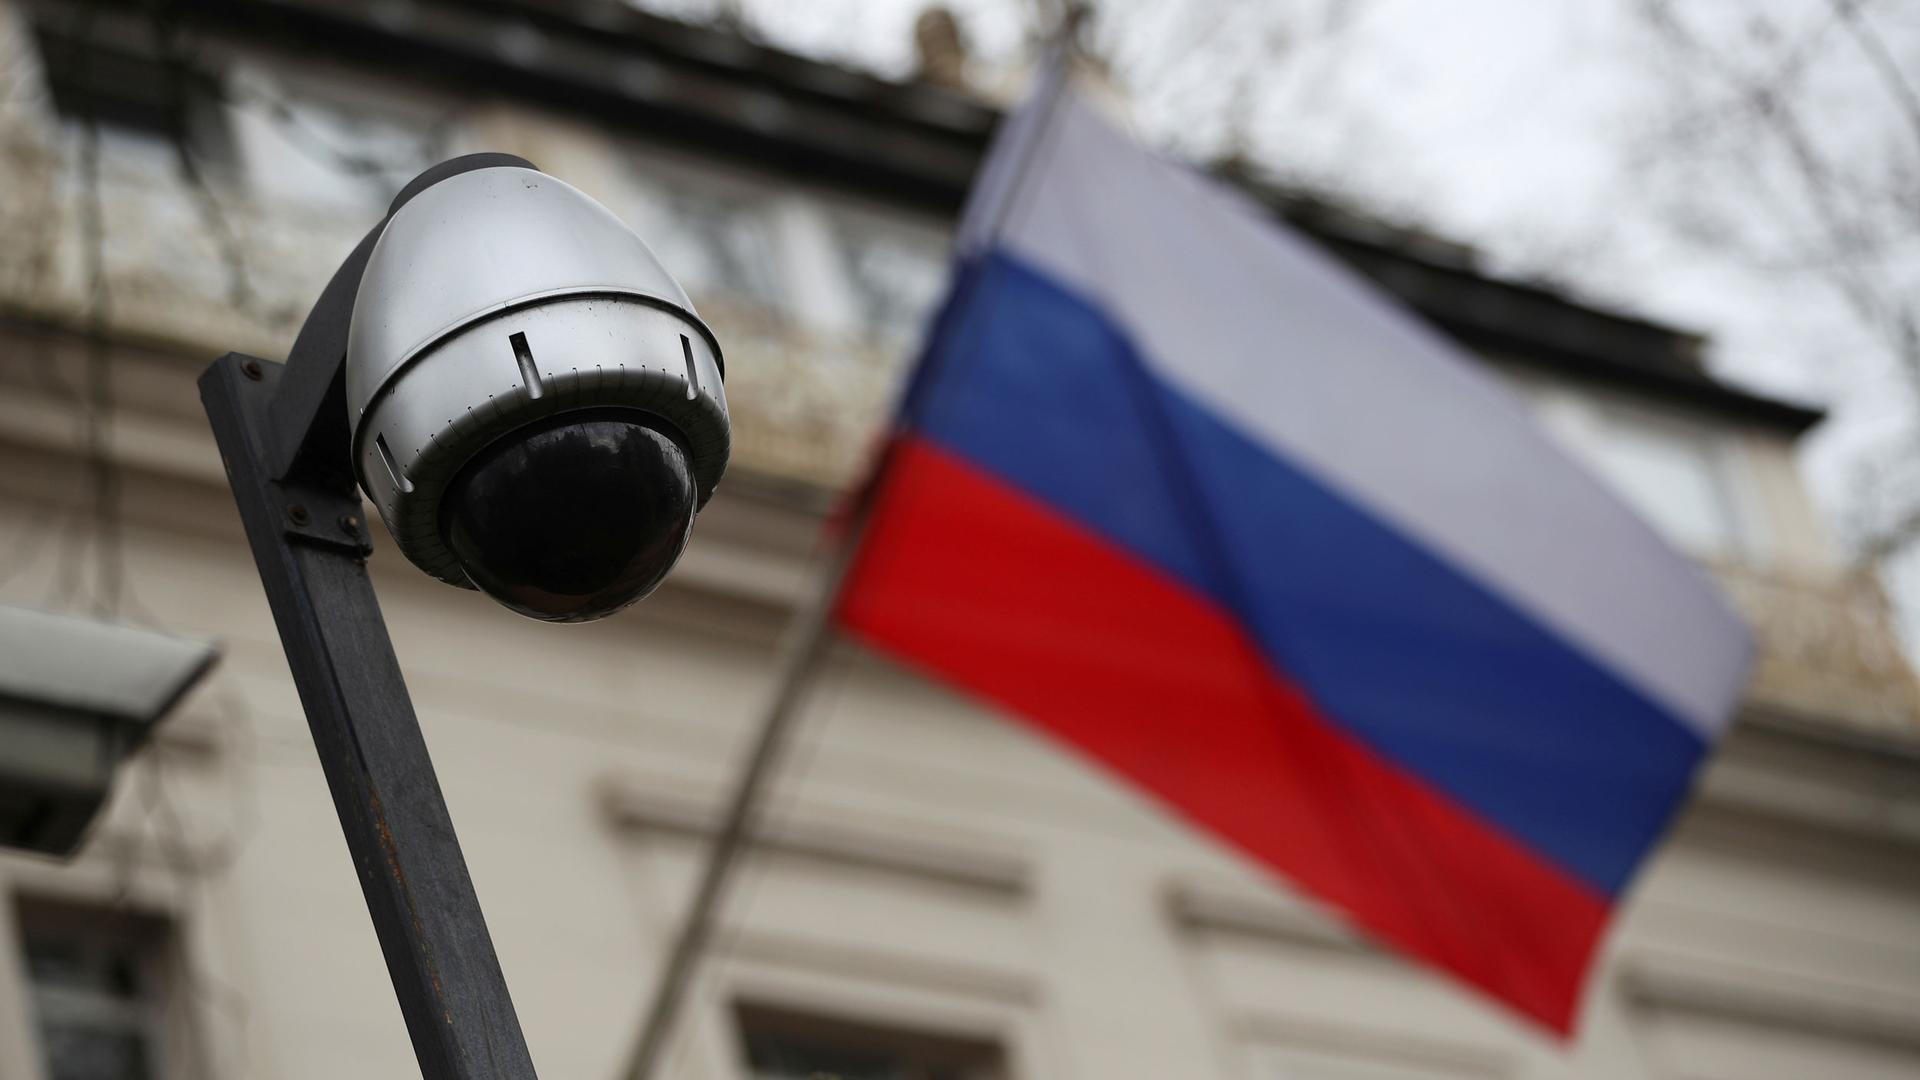 The dark lens of a security camera is shown with a Russian Federation flag in soft focus in the background.